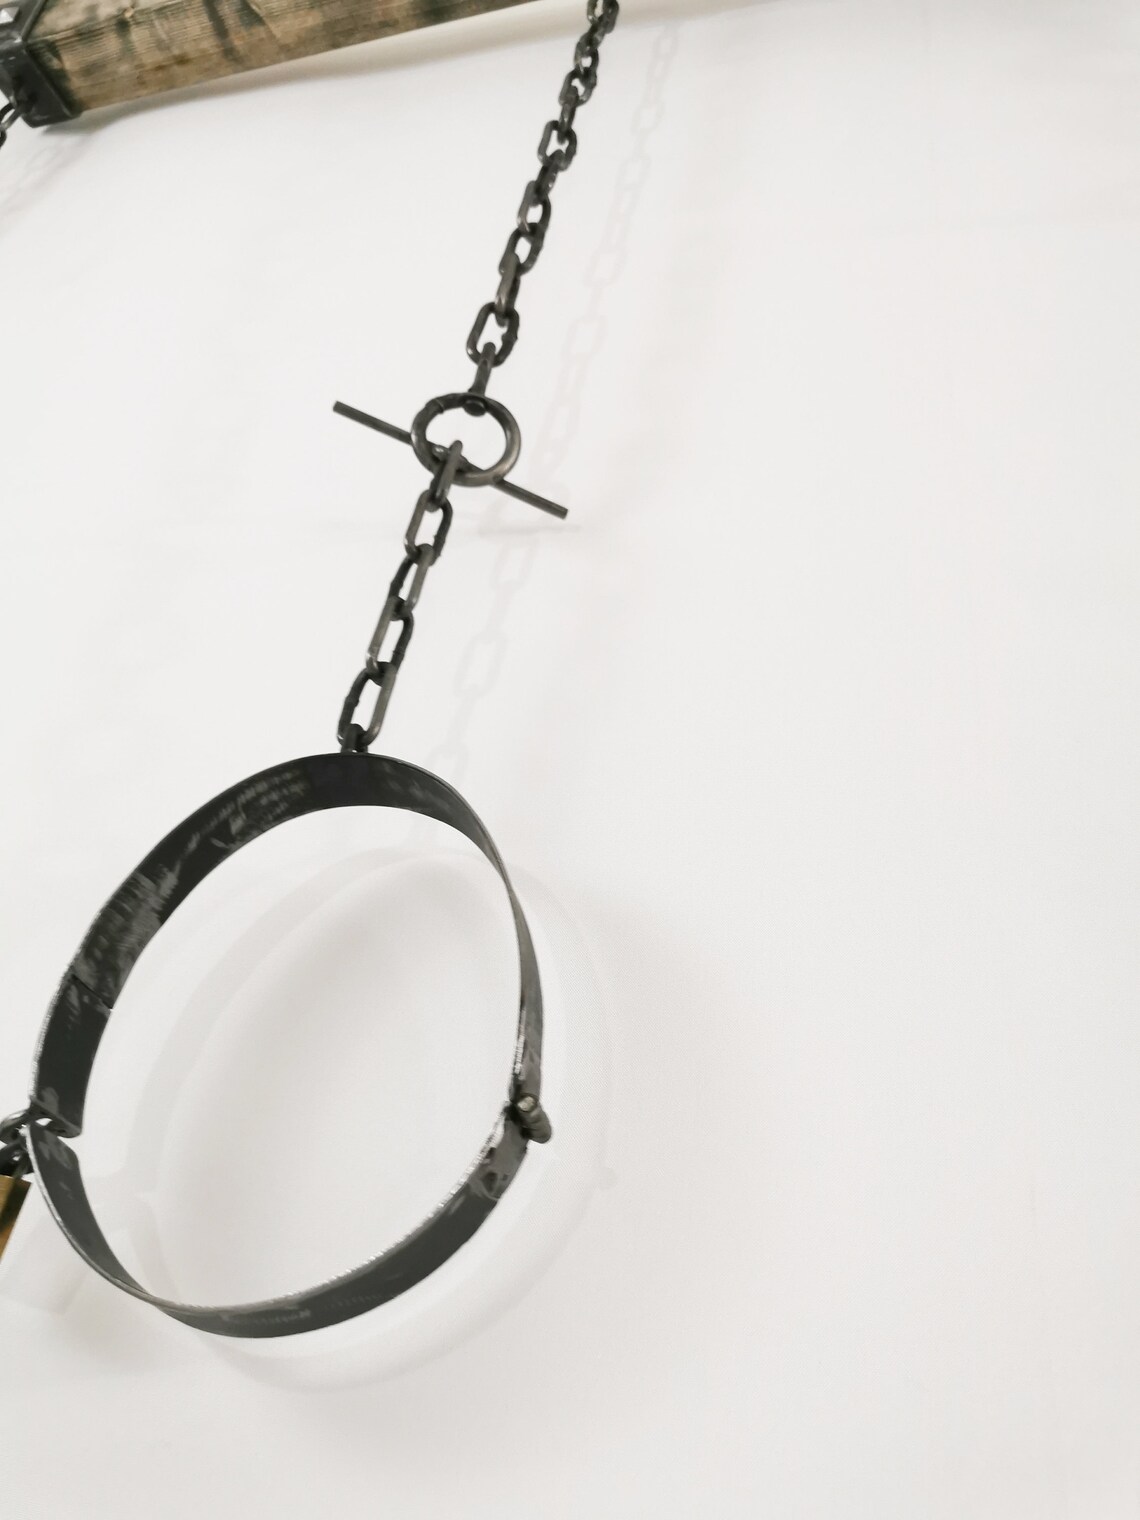 Metal Bdsm Spreader Wooden Bar With Handcuffs And Collar Etsy